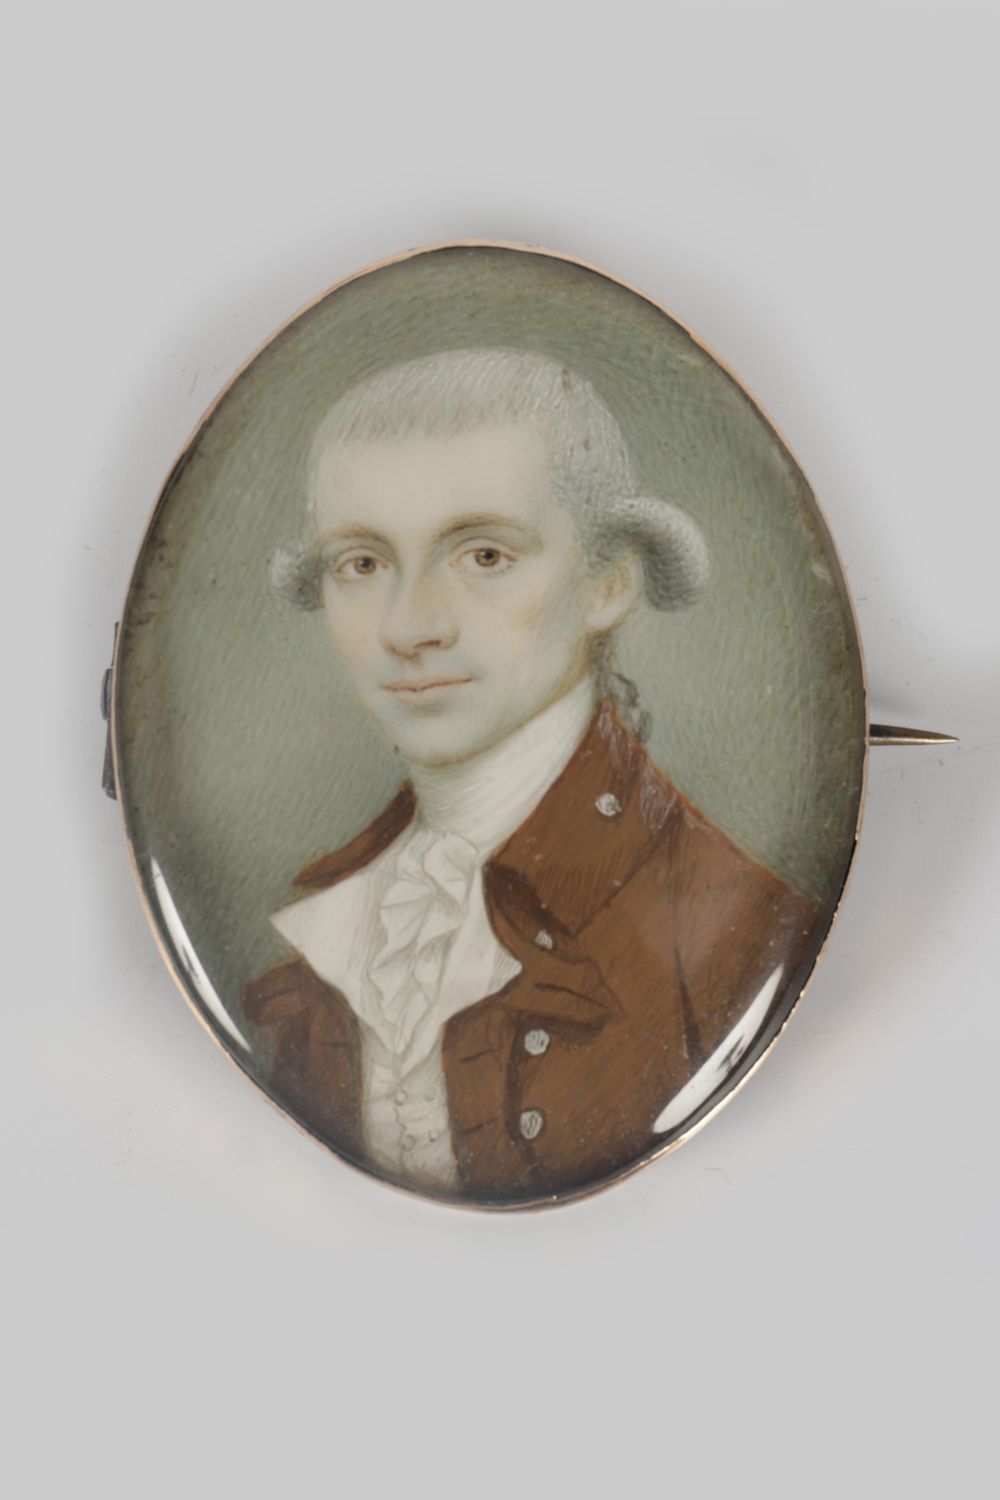 ATTRIBUTED TO JOHN COMERFORD (c.1762-1832/35)